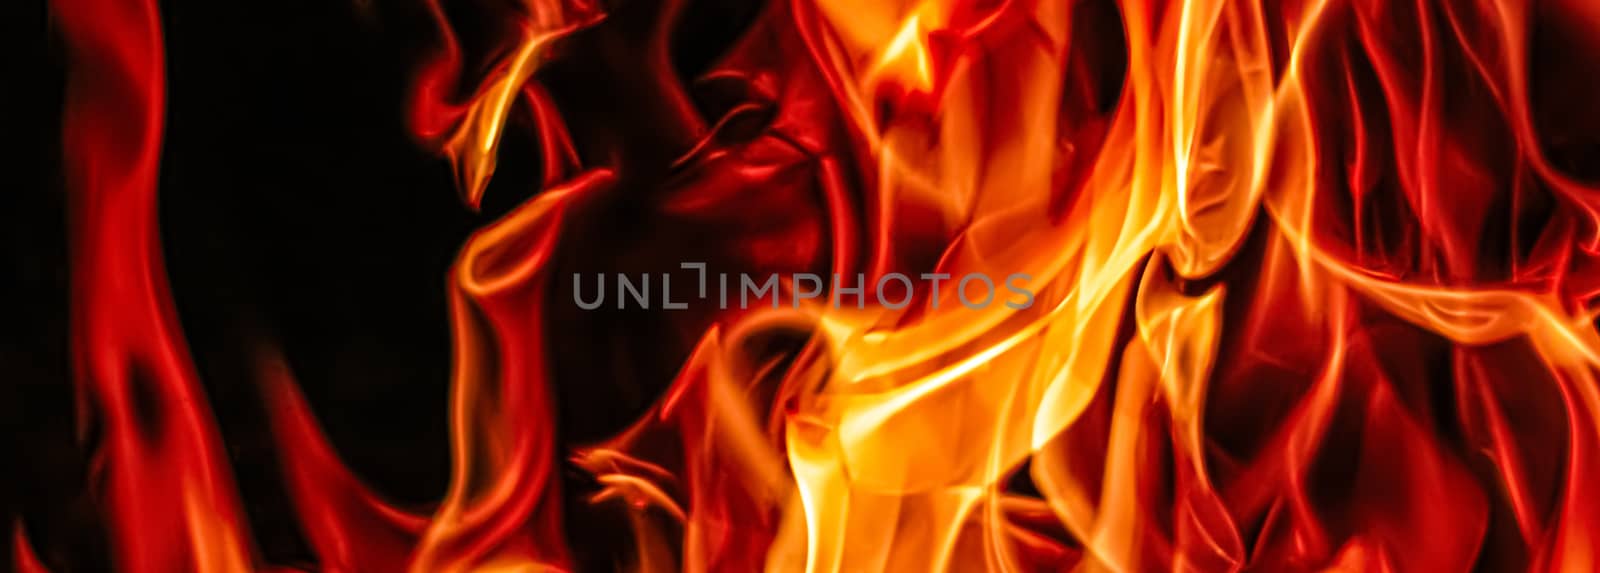 Hot fire flames as nature element and abstract background by Anneleven